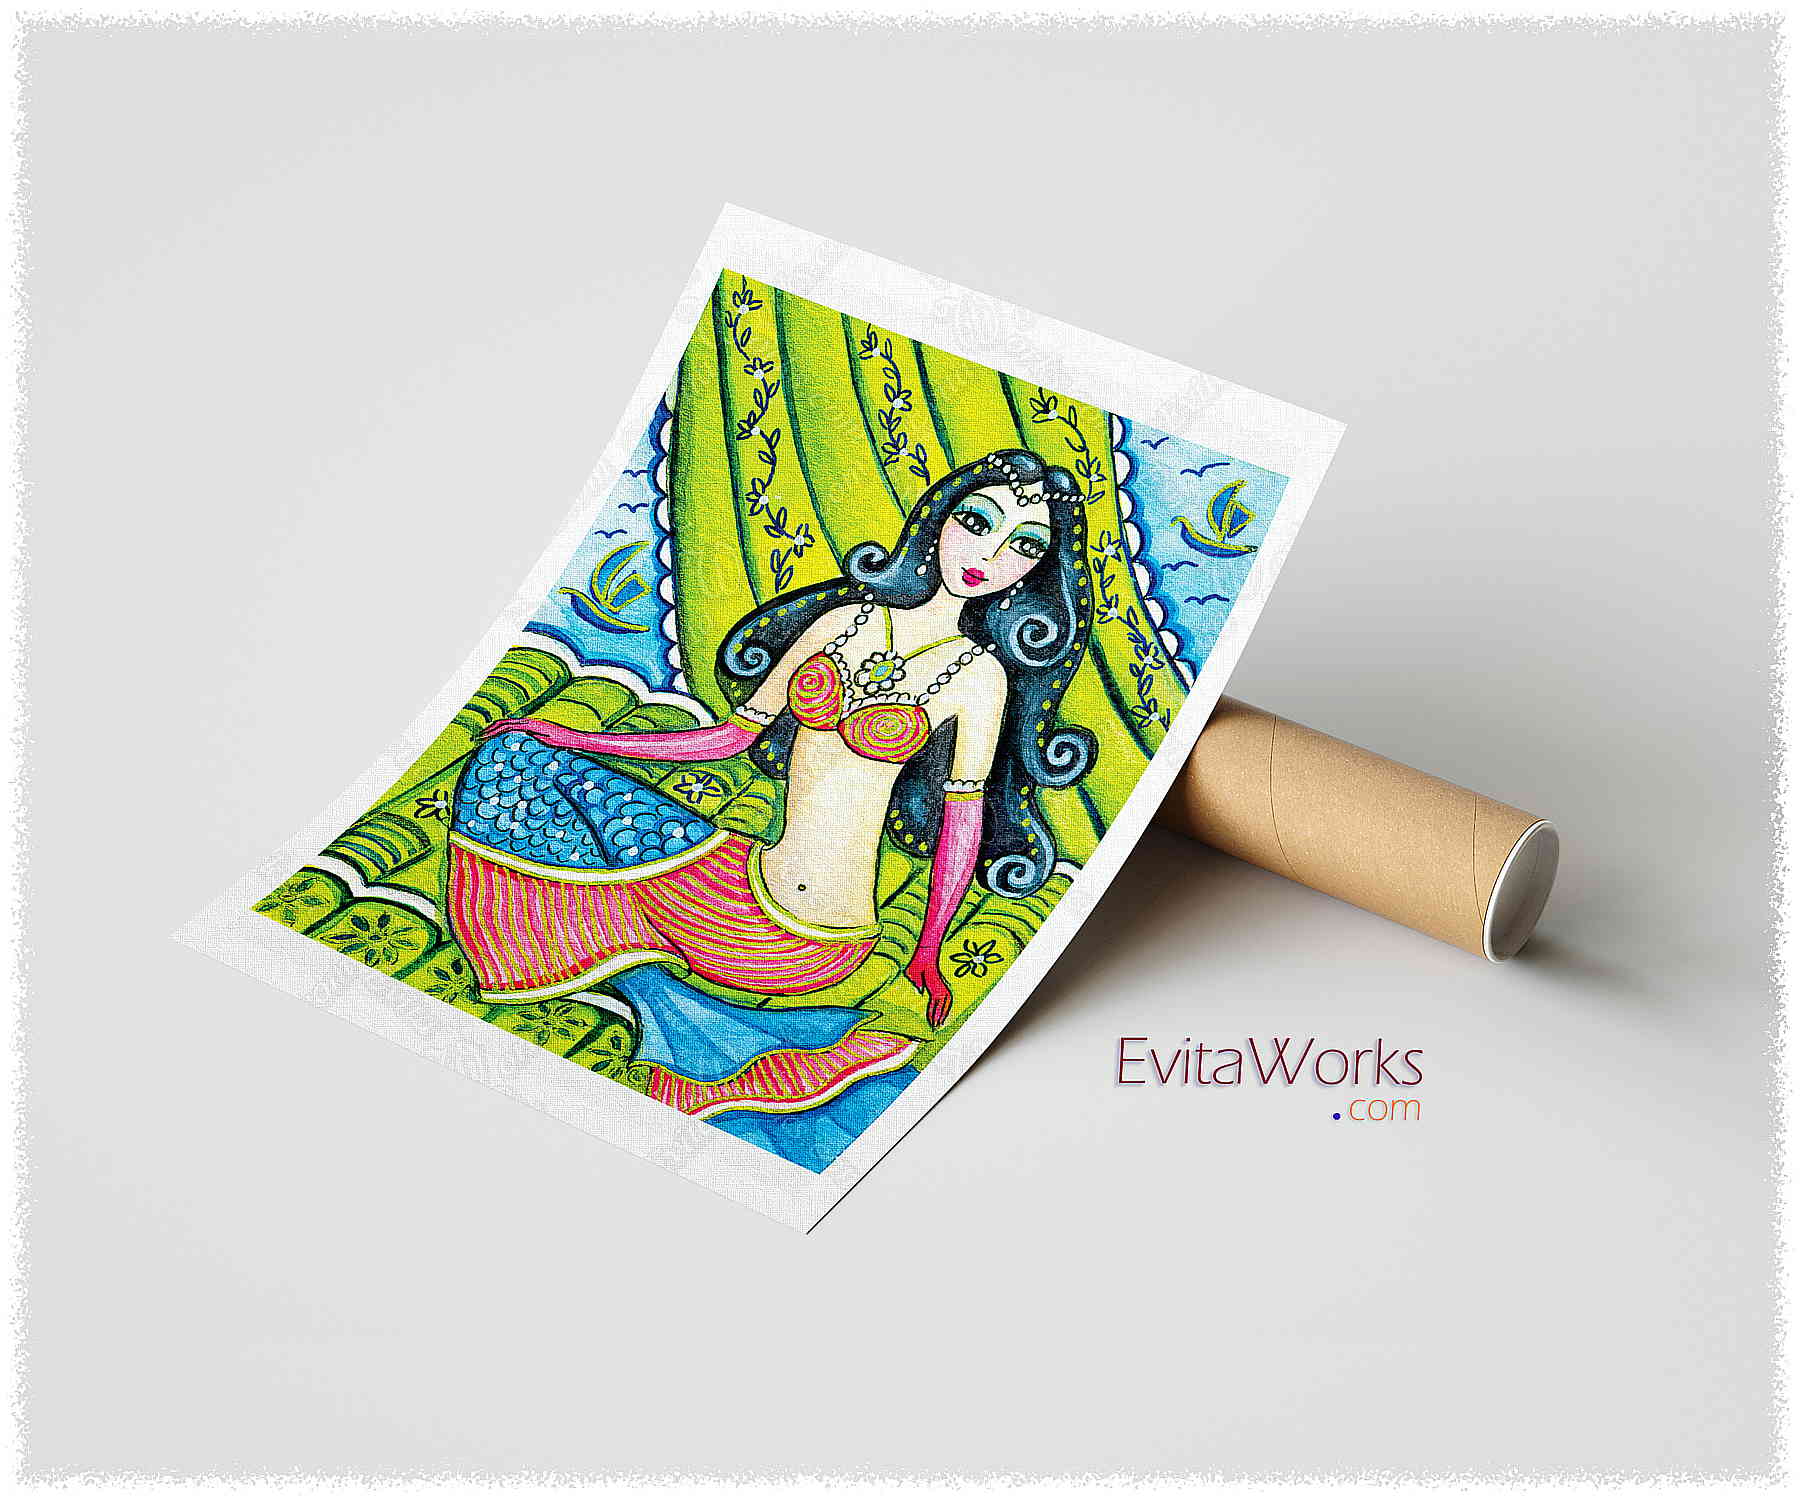 Hit to learn about "Mermaid 54, beautiful female creature" on prints